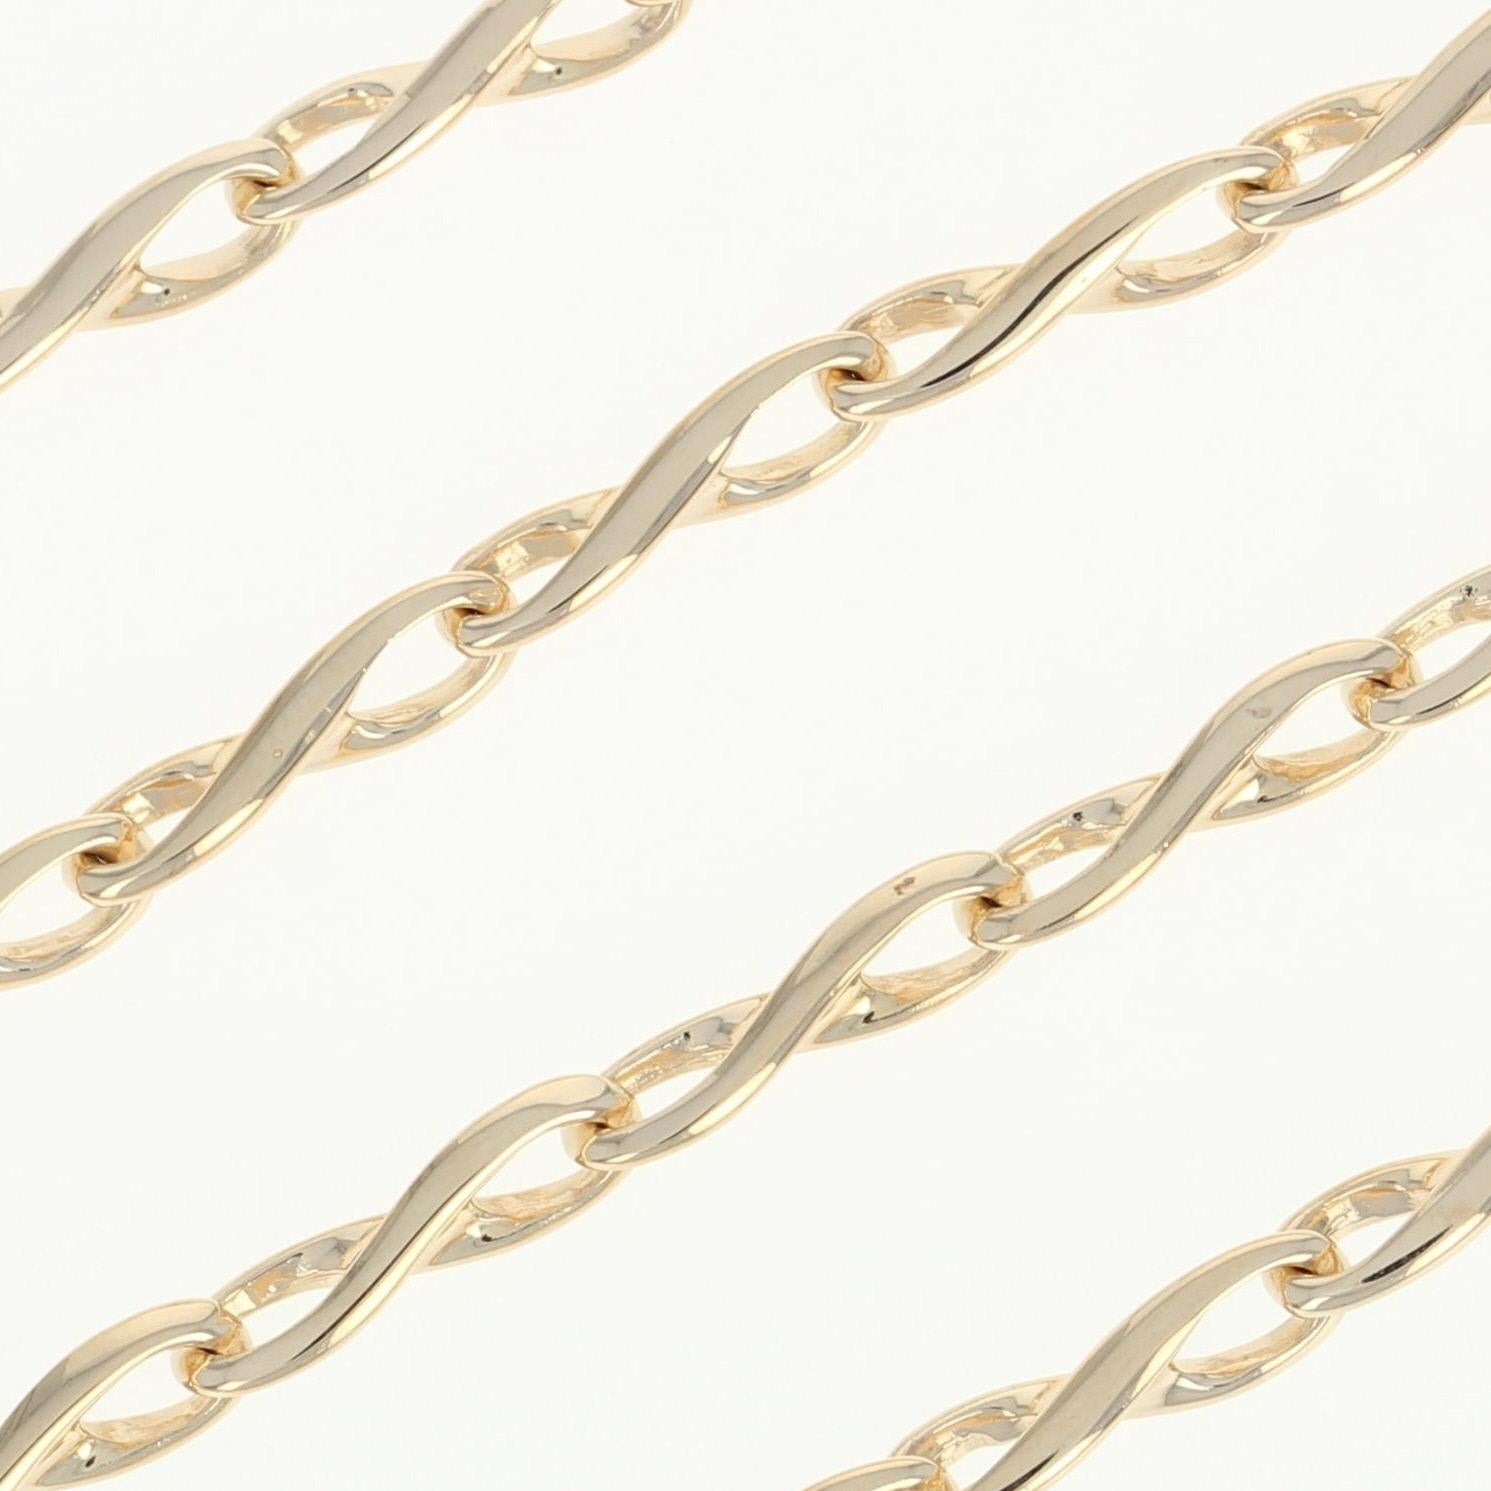 Expertly crafted in glowing 14k yellow gold, this luxurious necklace is destined to become a signature piece in your fine jewelry collection! This piece is fashioned in an infinity chain style showcasing a smooth, reflective finish that shines